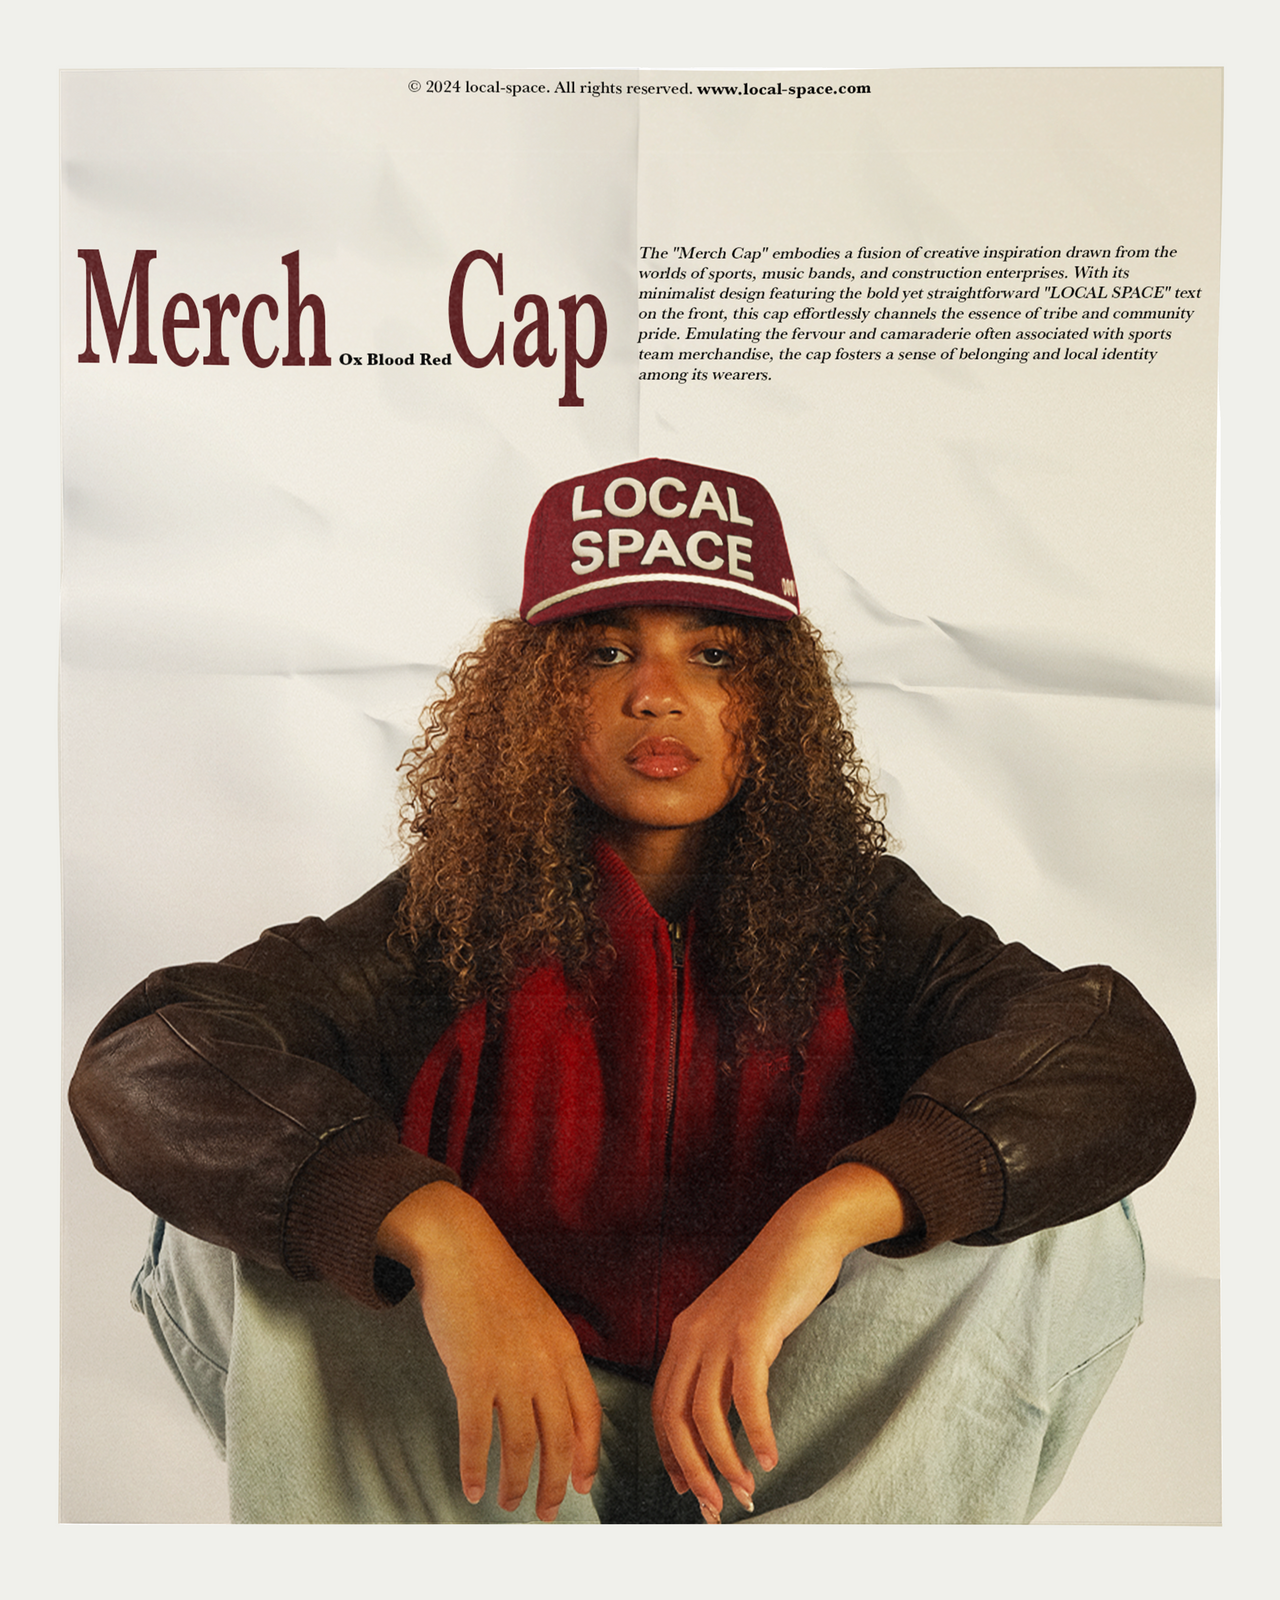 Ox-blood Red Merch Cap featuring 'LOCAL SPACE' in puff print on the front, 'ISSUE 0001' embroidery on the side, vintage snapback fit, and a slightly curved brim, made from 100% cotton canvas.